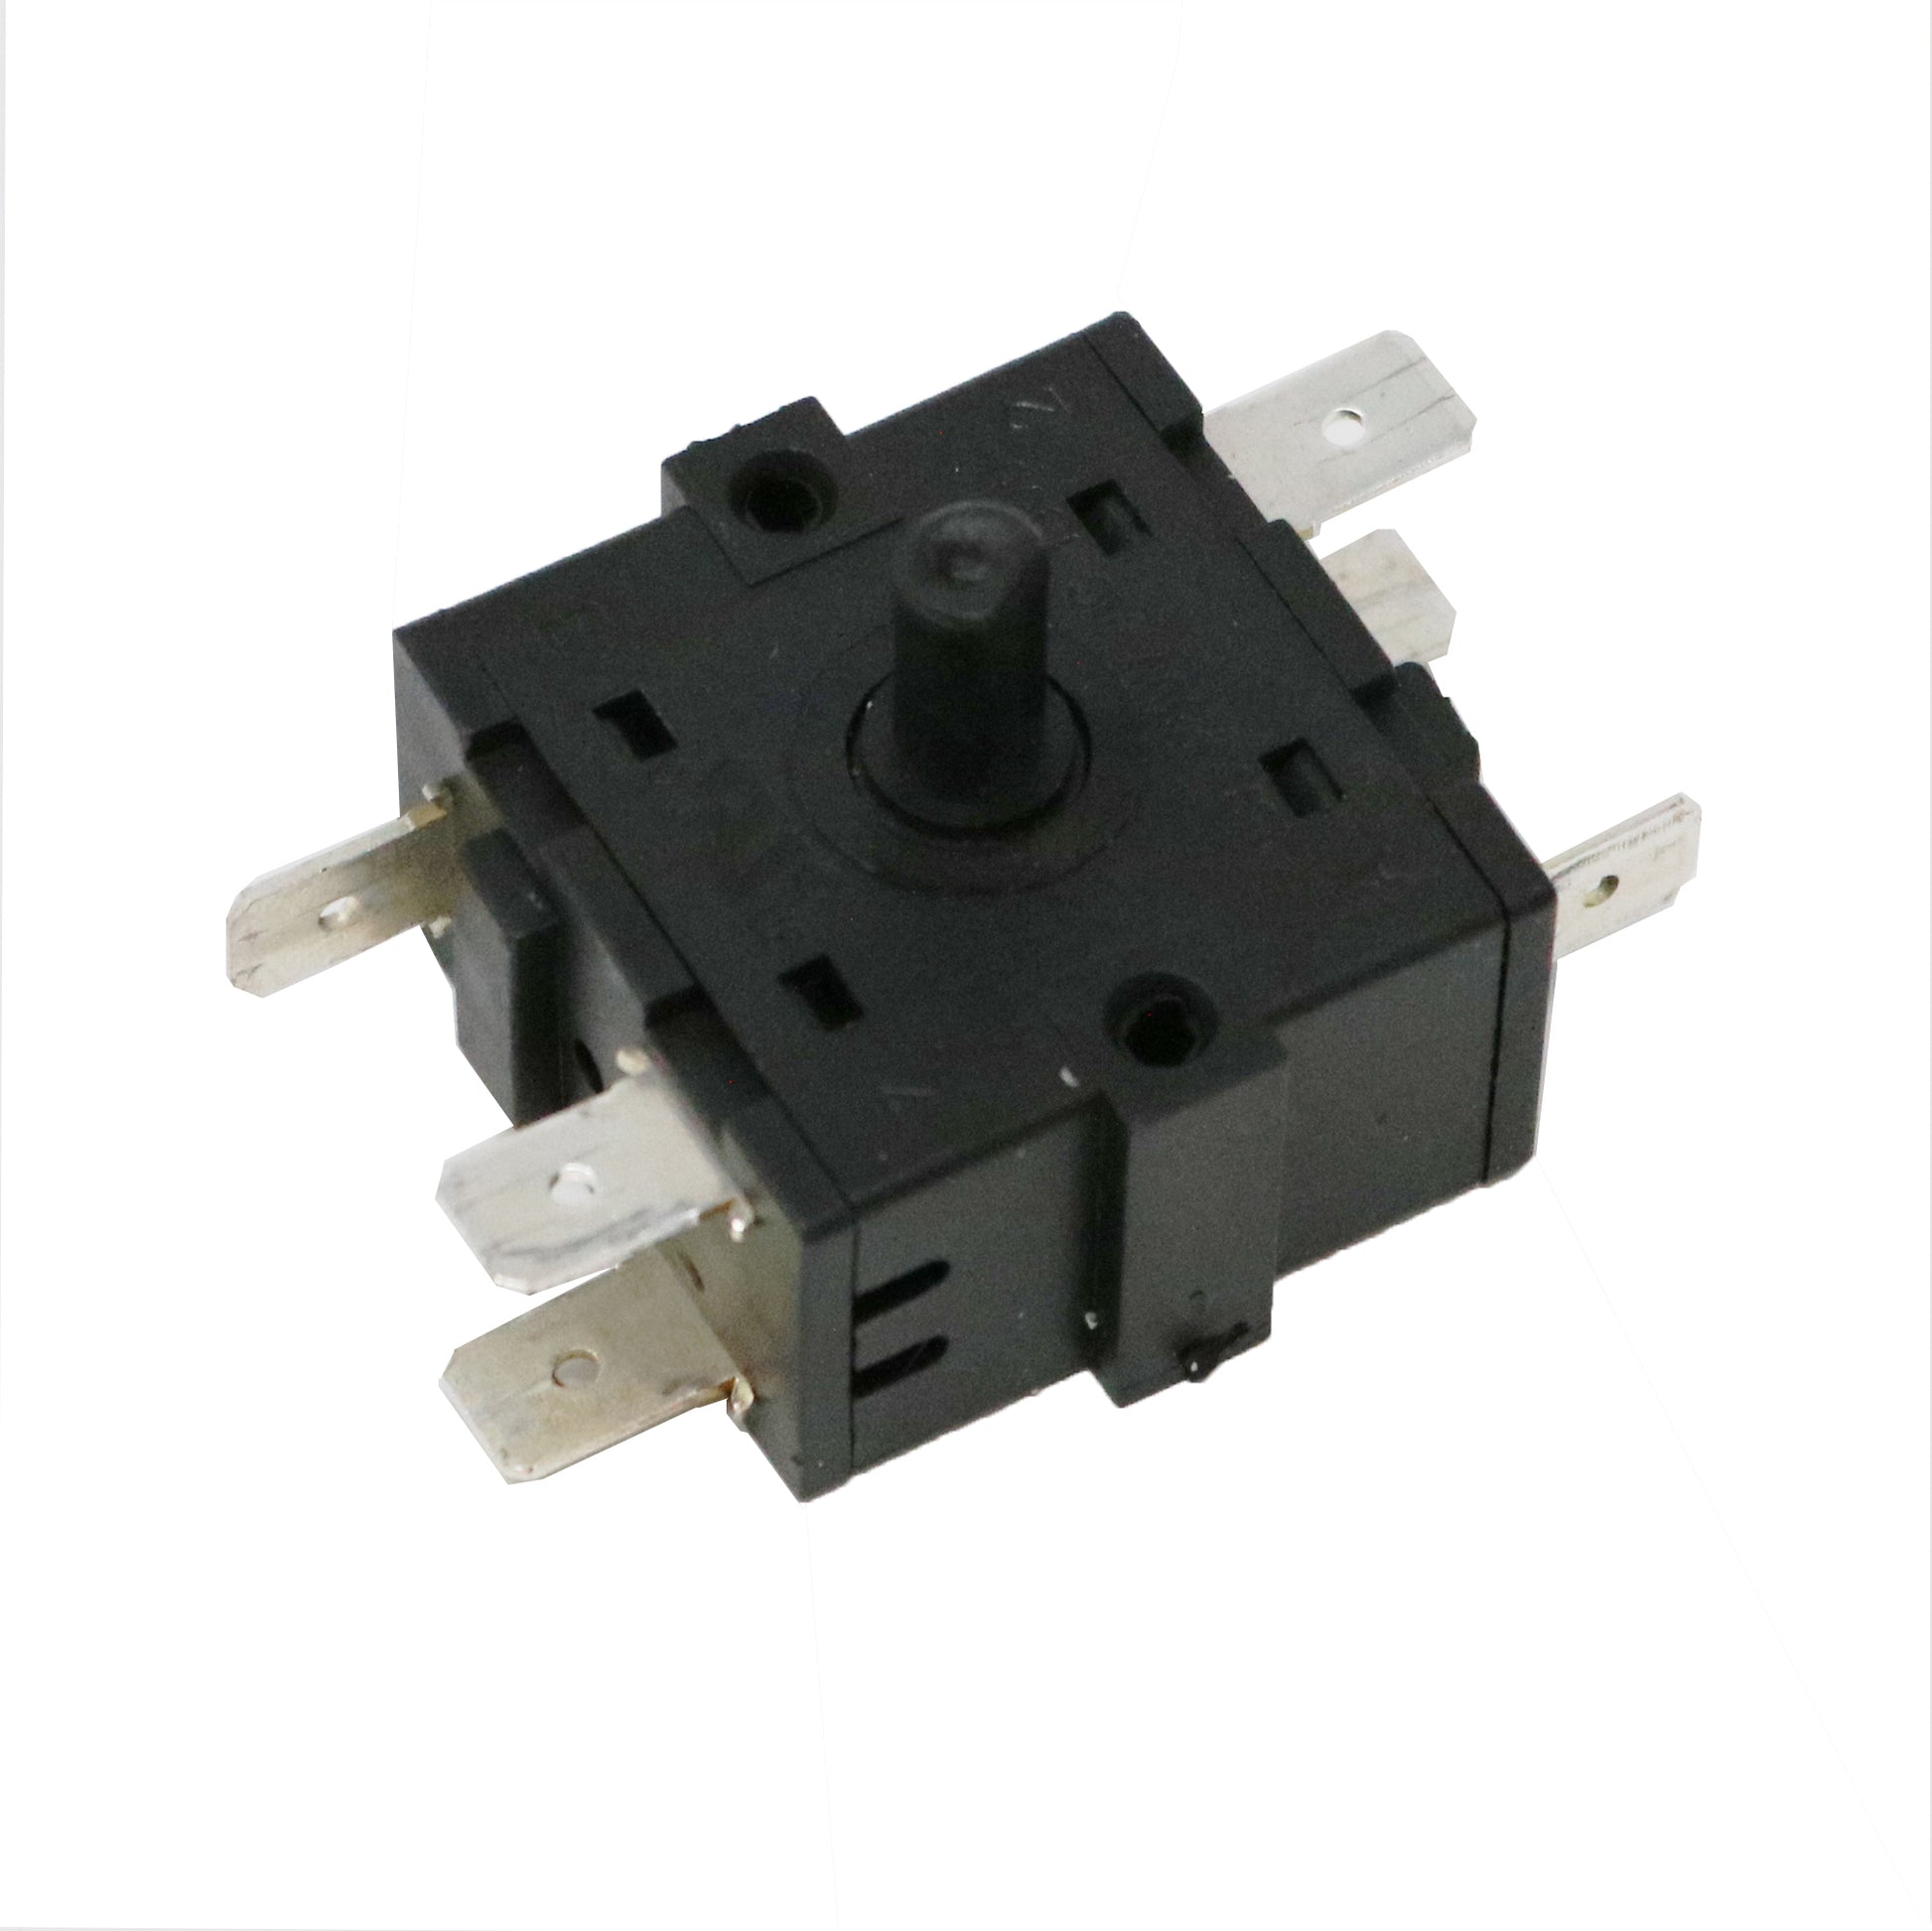 4 Speed Switch for FC-100 Air Circulator